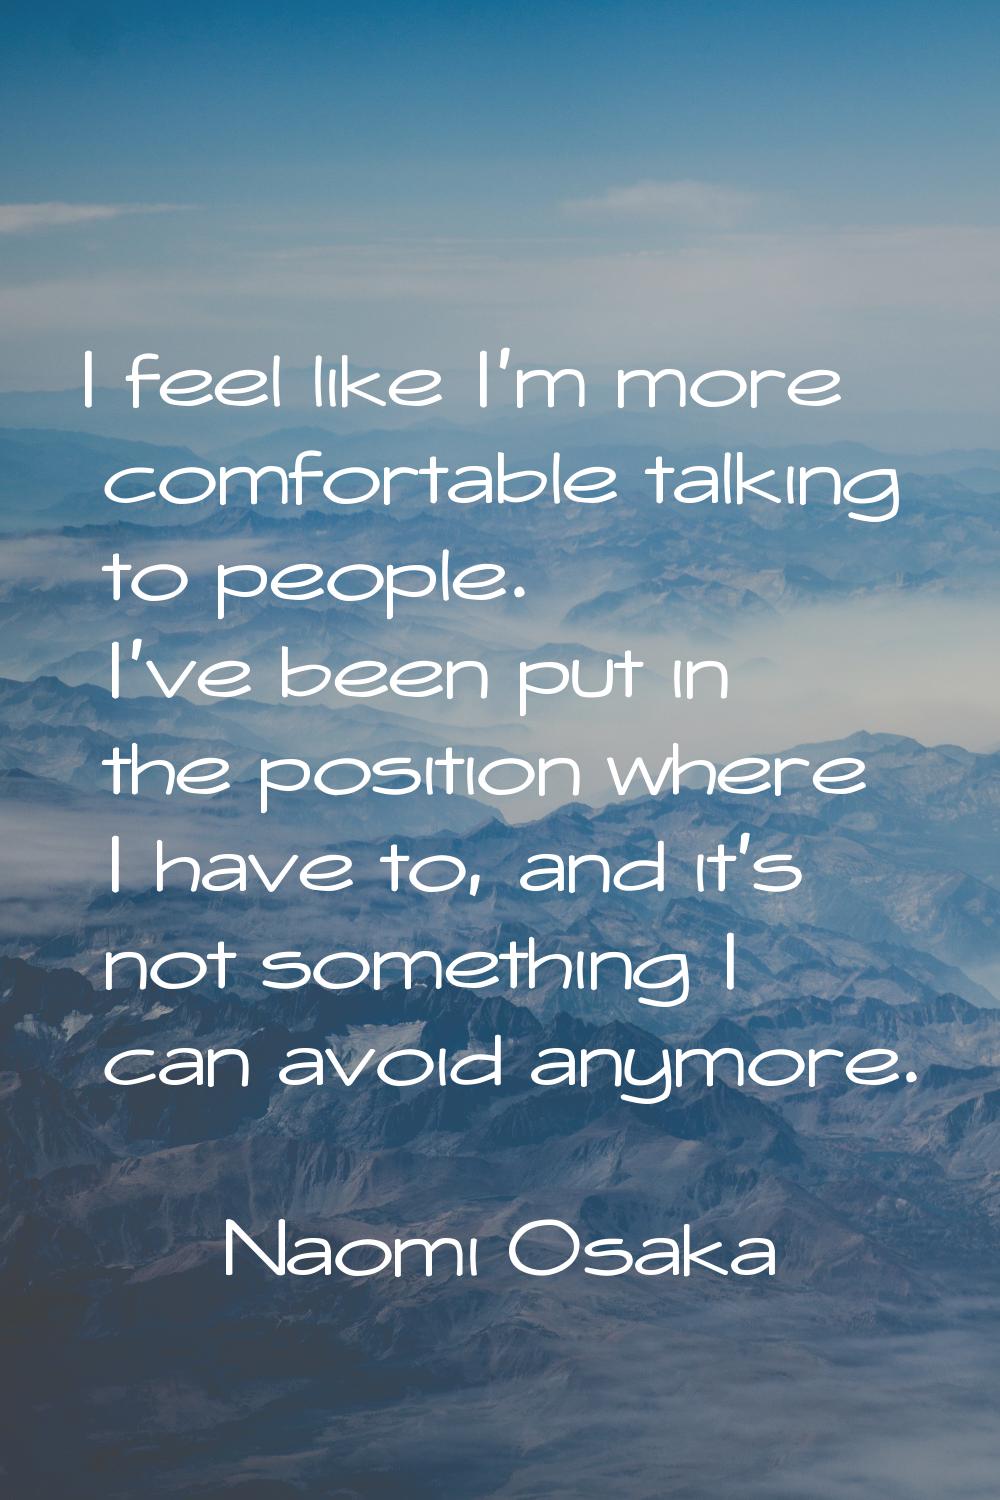 I feel like I'm more comfortable talking to people. I've been put in the position where I have to, 